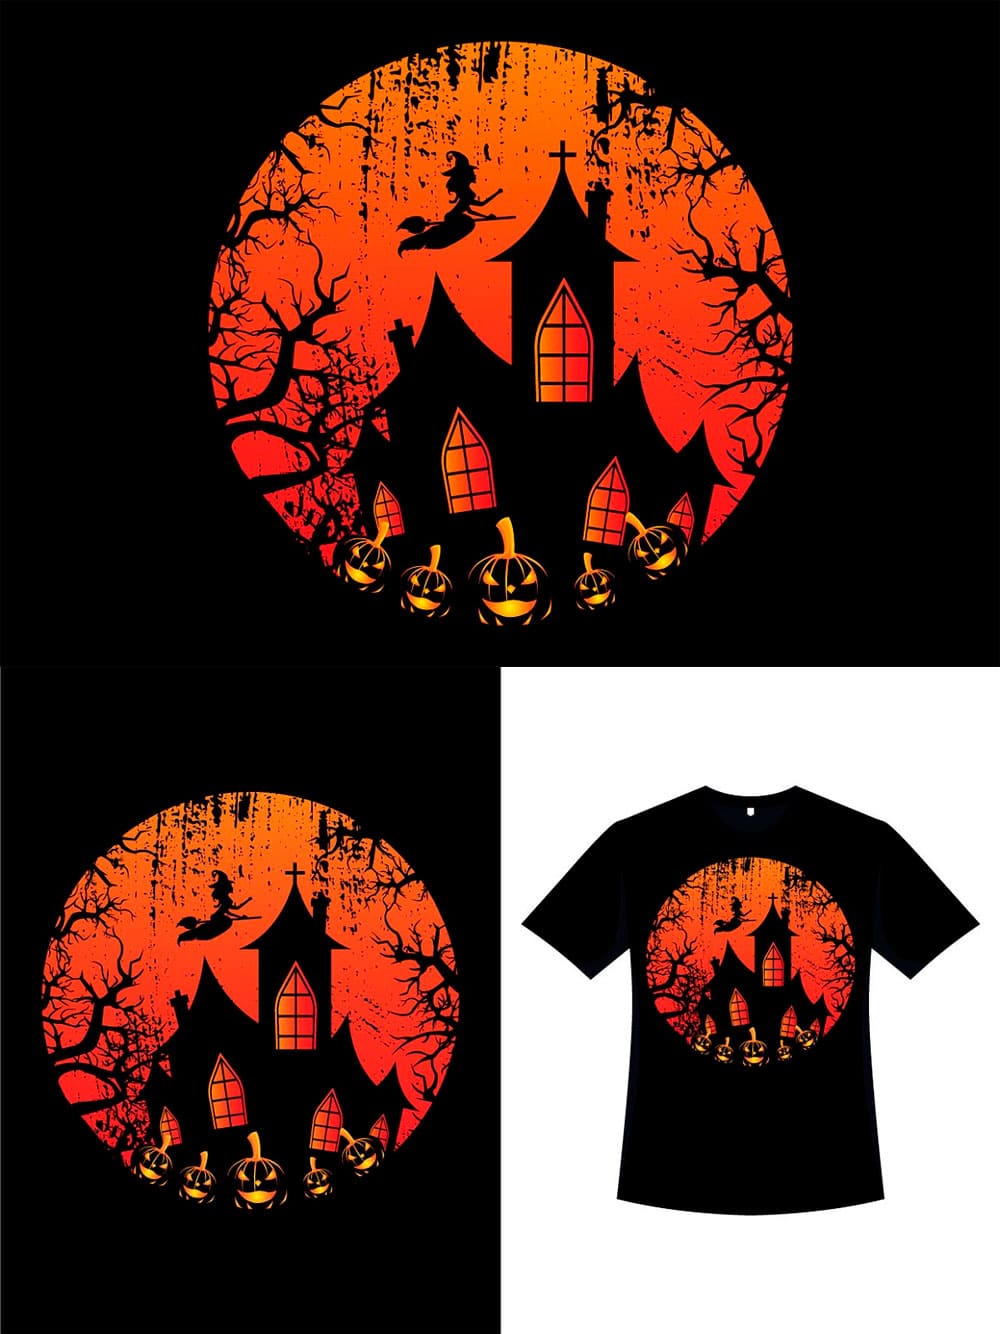 Halloween t-shirt design with grunge, picture for pinterest.